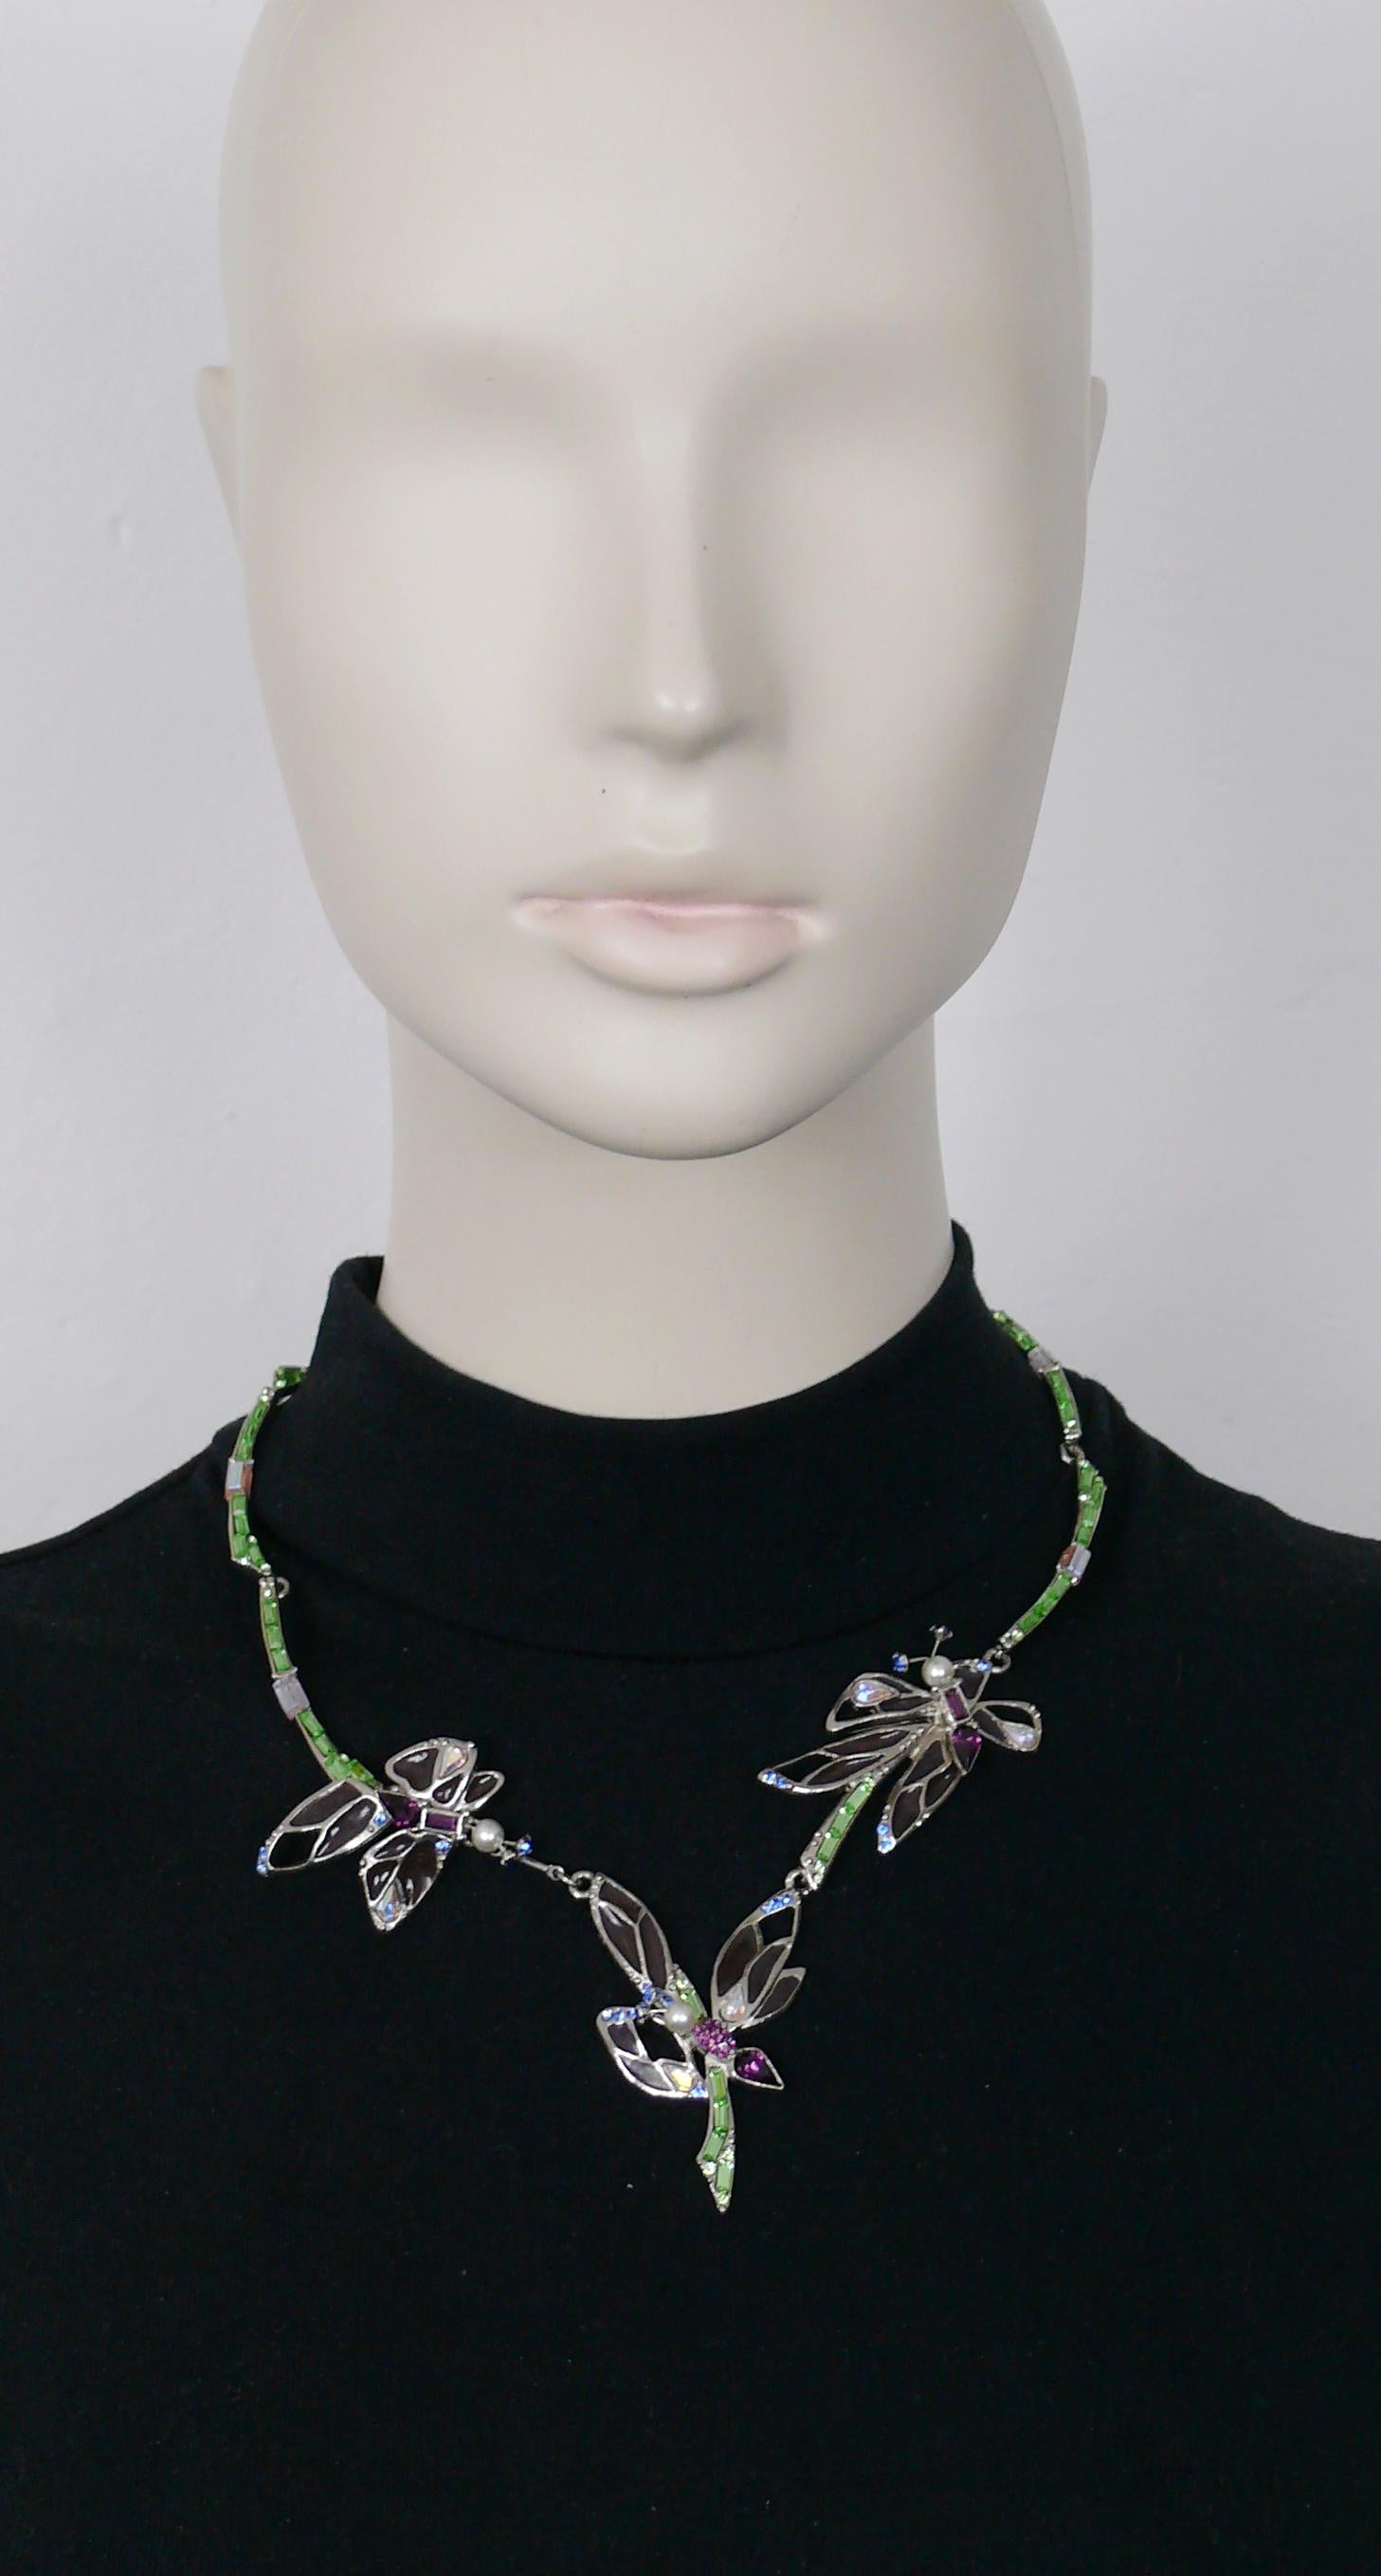 CHRISTIAN LACROIX vintage silver toned necklace featuring three butterflies embellished with purple resin stained glass like wings, multicolored crystals, faux pearl and a pair of antennae with blue crystals. The chain links are embellished with